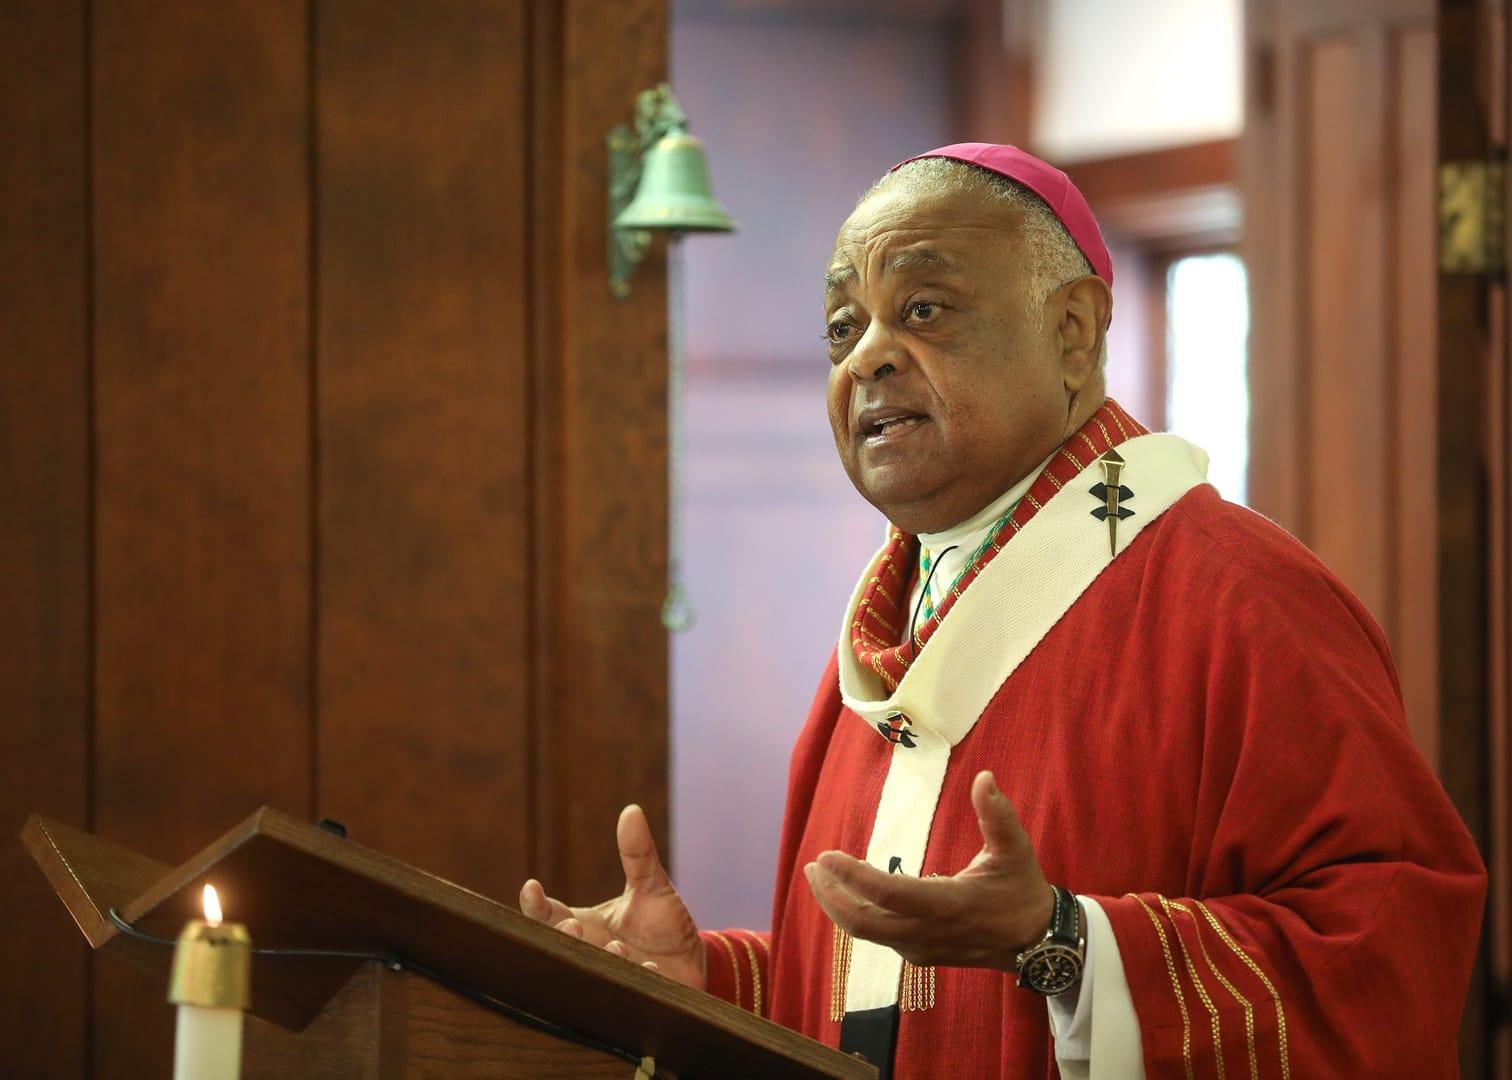 Washington archbishop says ‘conversion’ needed to fight racism